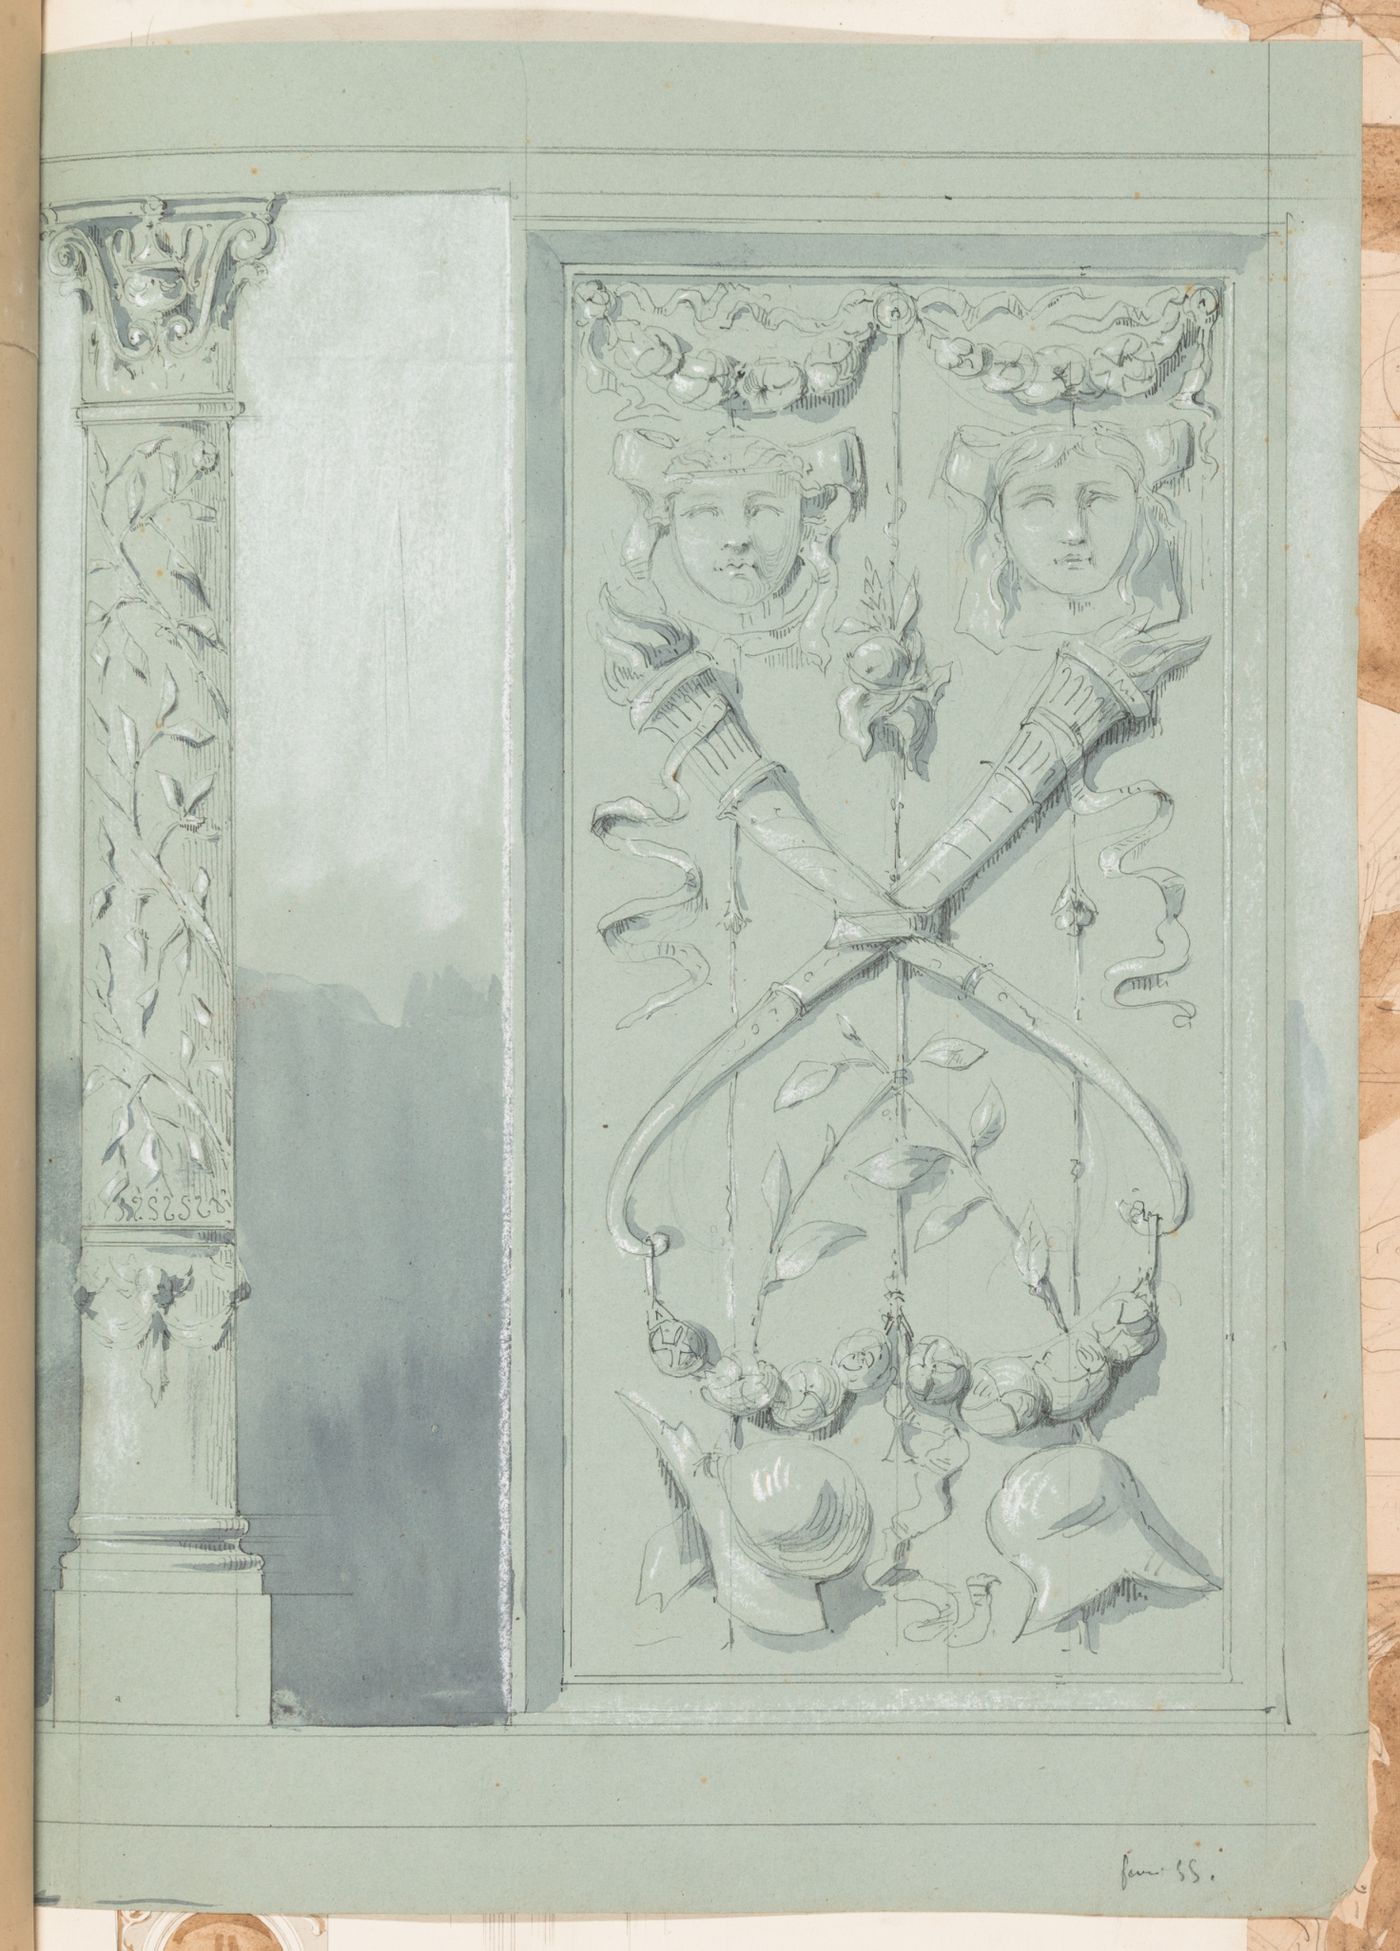 Elevations of a column with vegetal ornament and a panel with grotesques